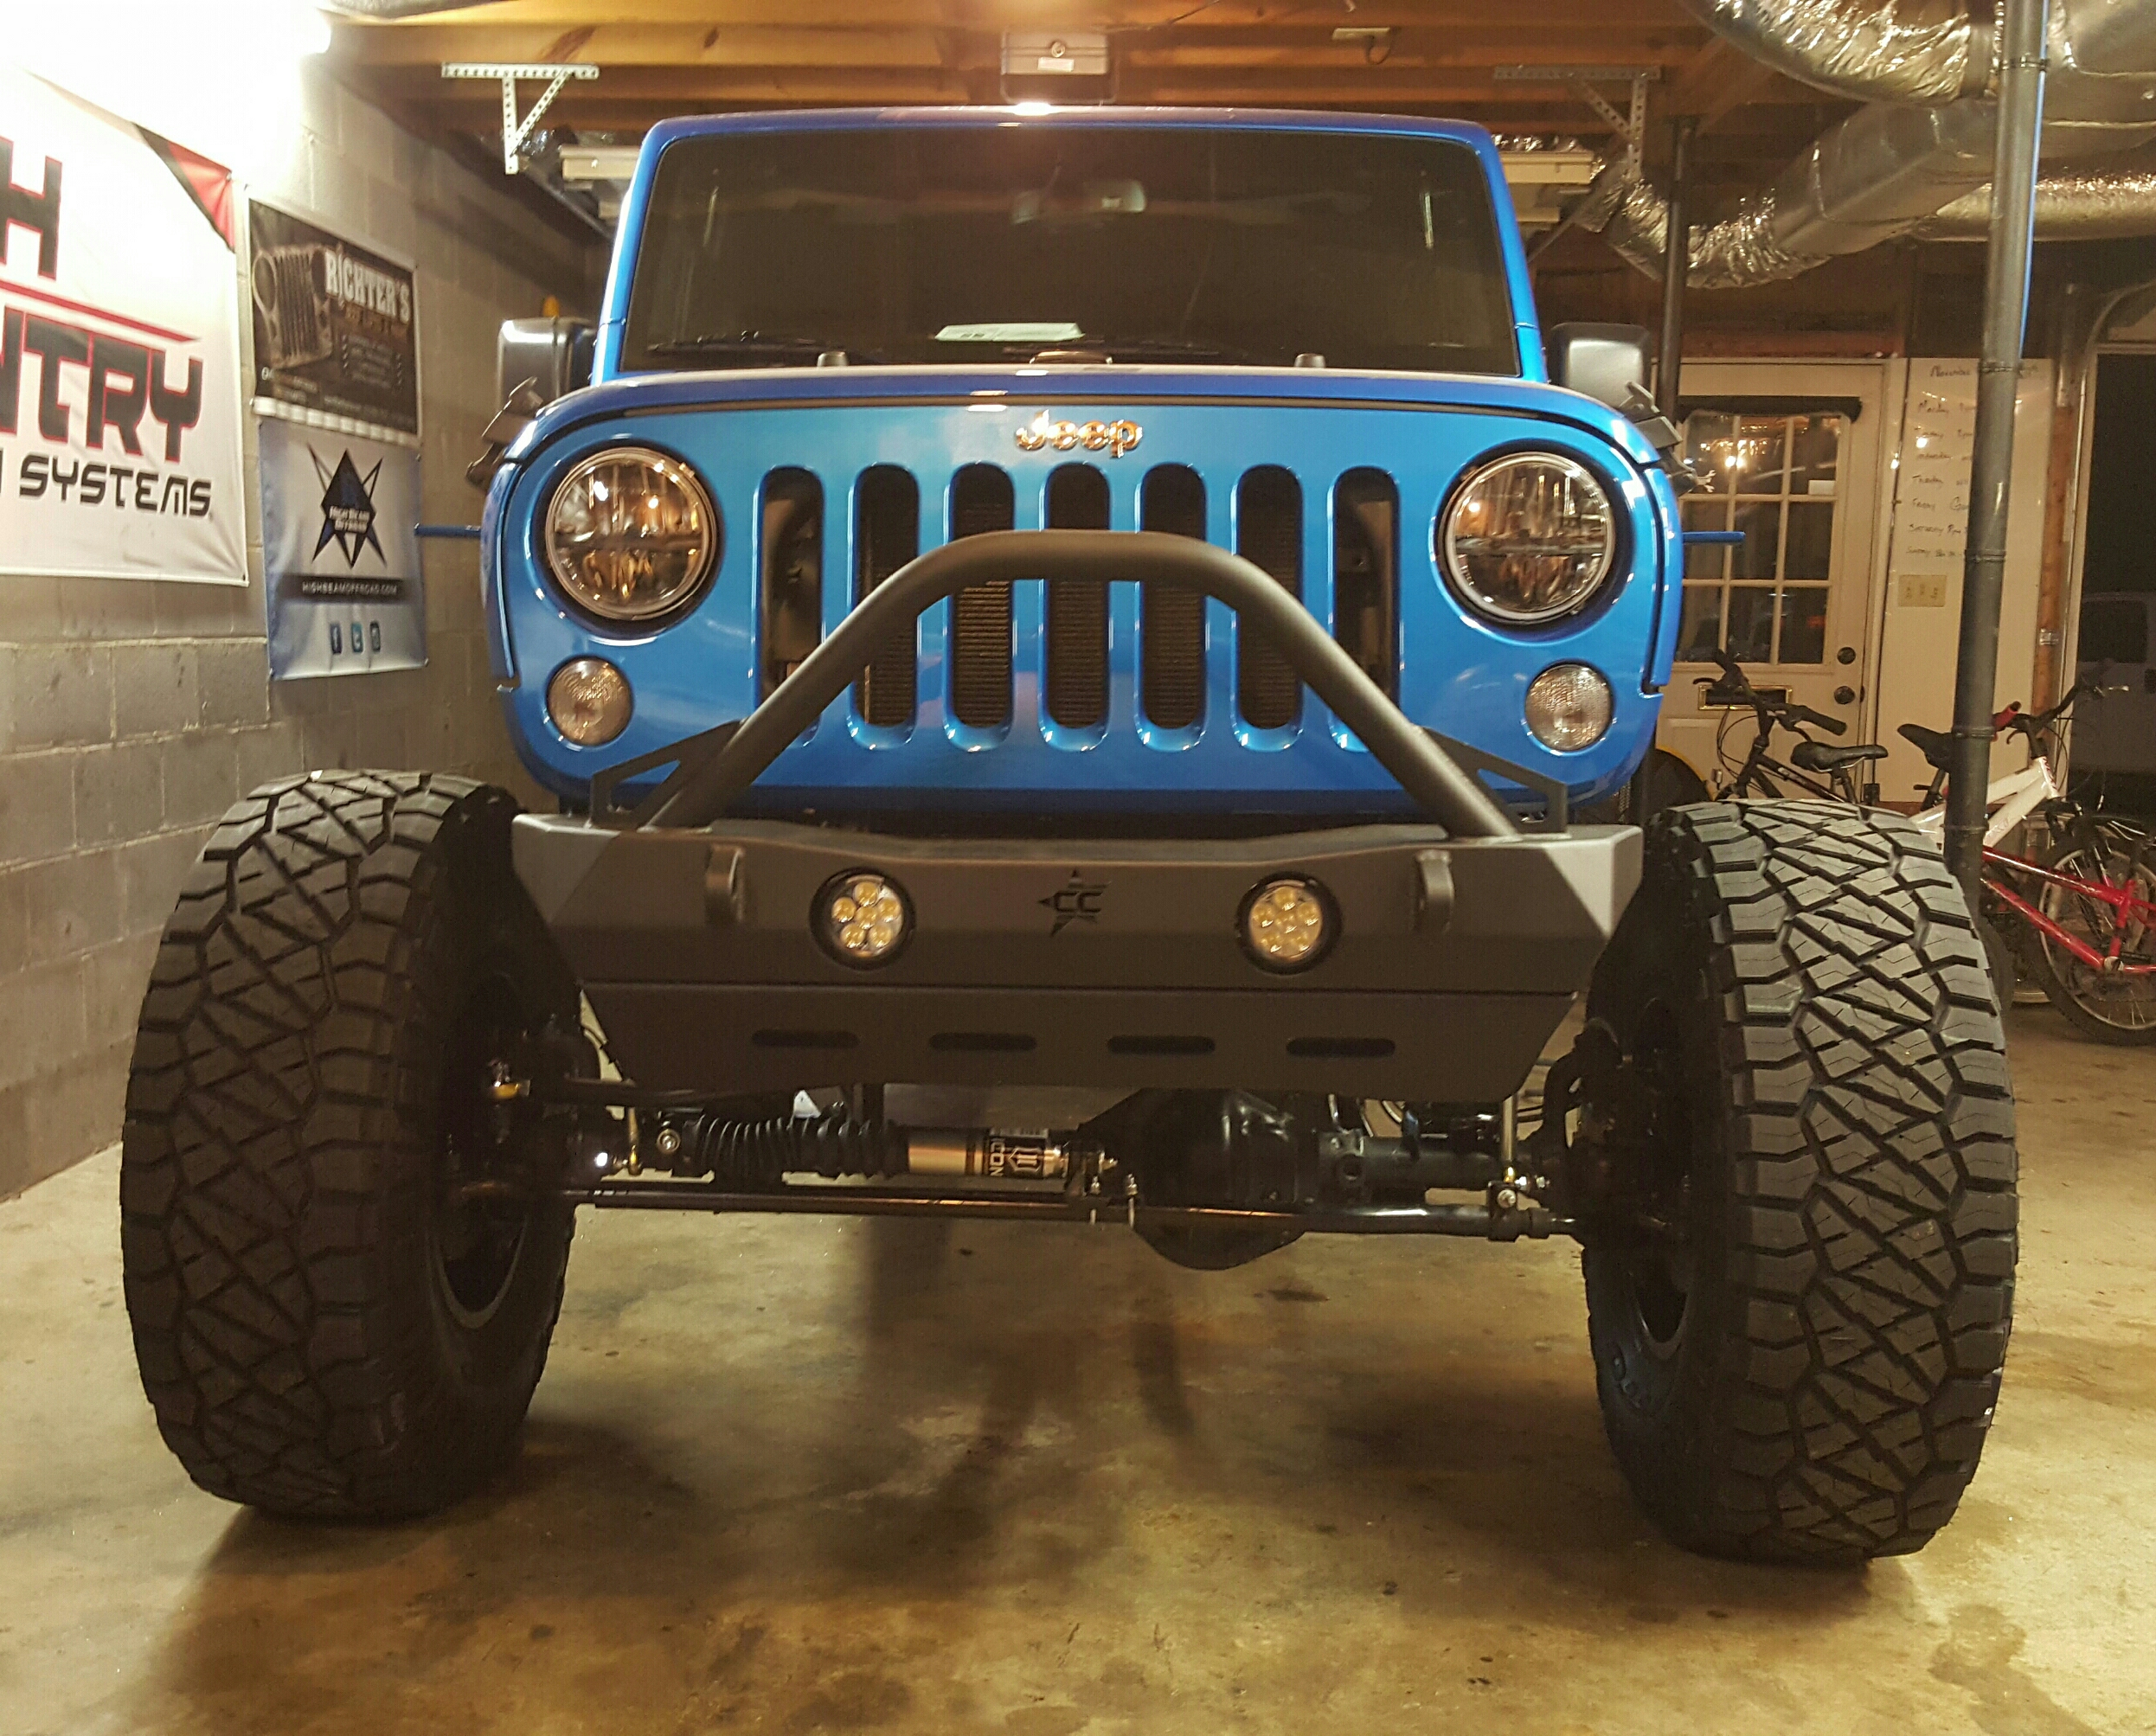 New Nitto Ridge Grappler review  - The top destination for Jeep  JK and JL Wrangler news, rumors, and discussion